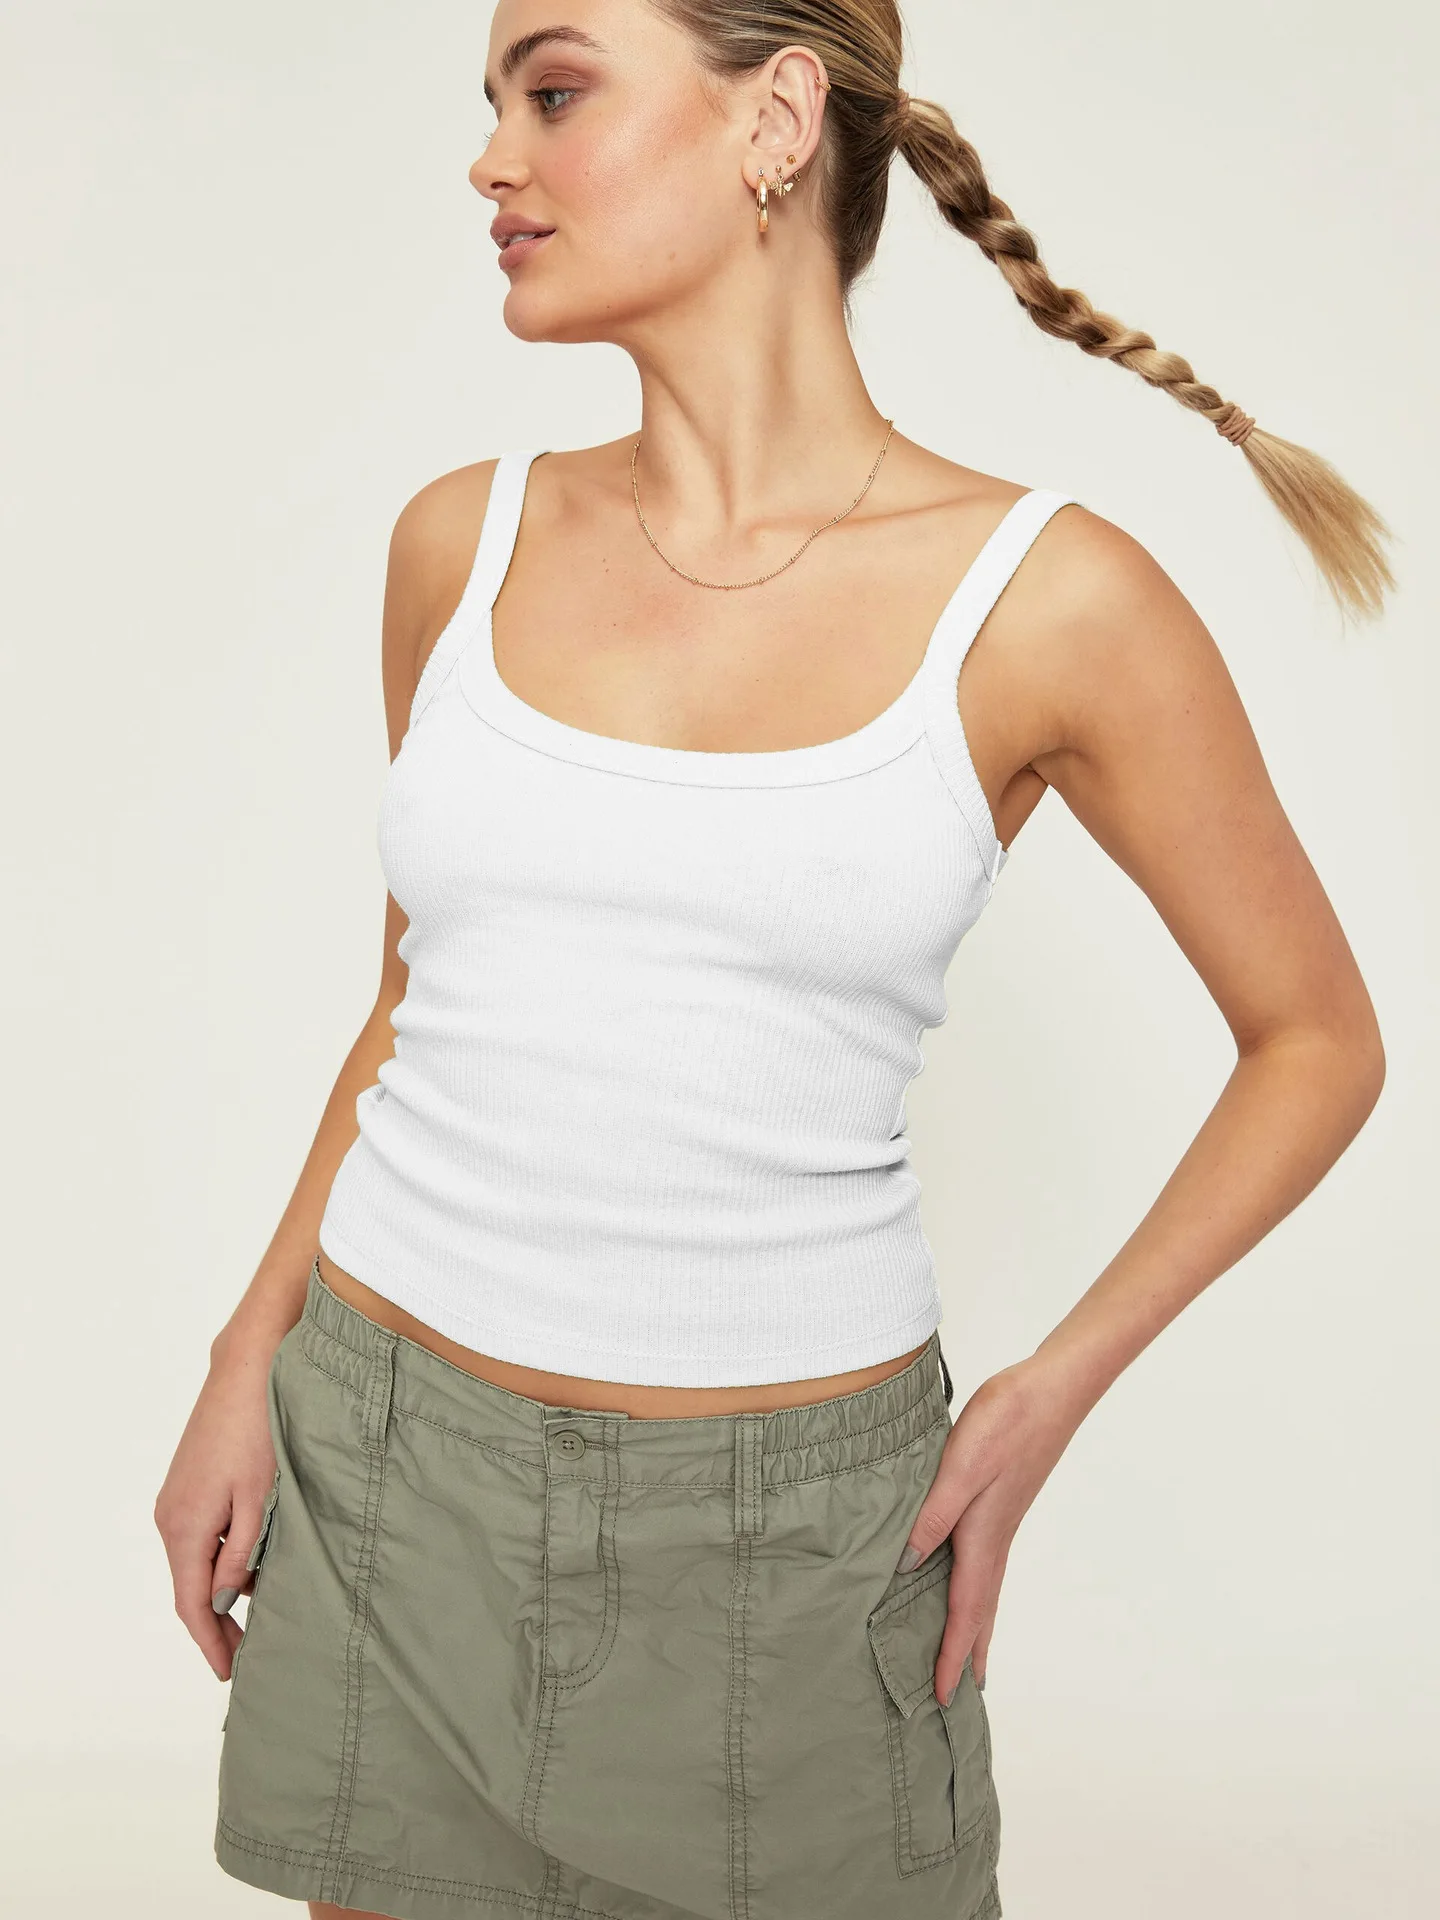 

Hot summer hot new sexy spice girl halter tank top wearing thread knit everything with a base crop top